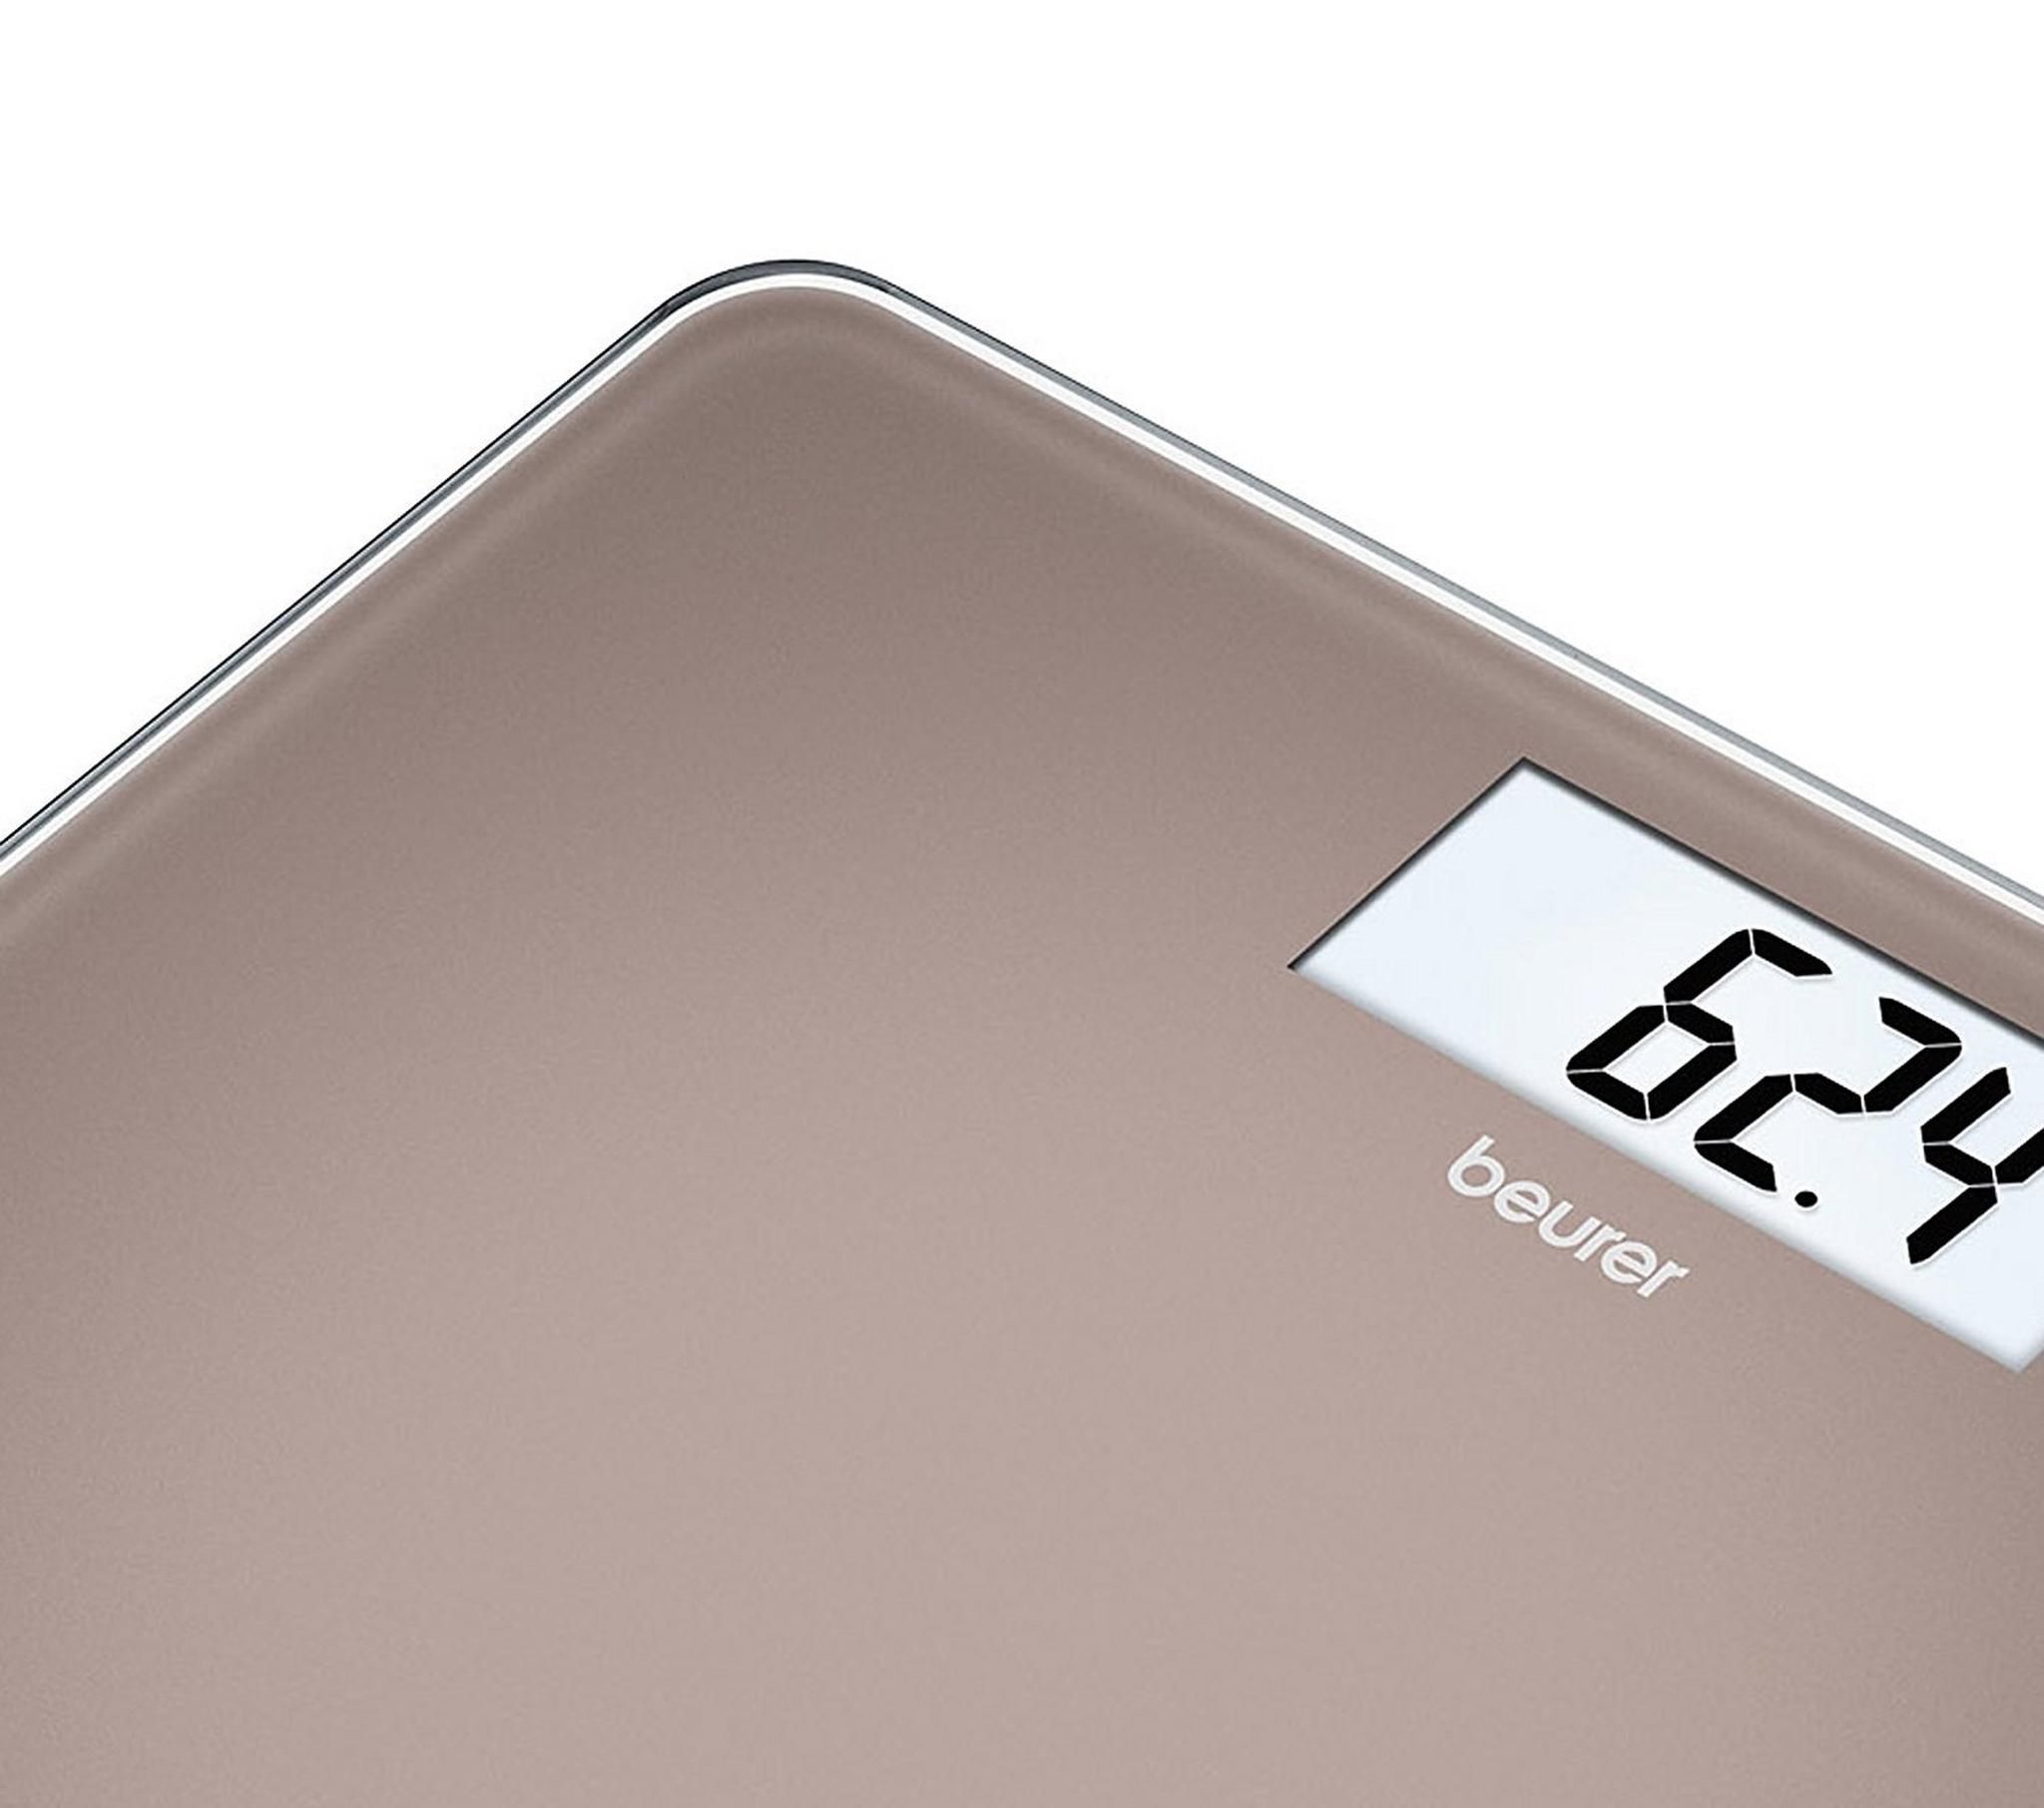 Beurer Glass Scale (GS 212) – Toffee